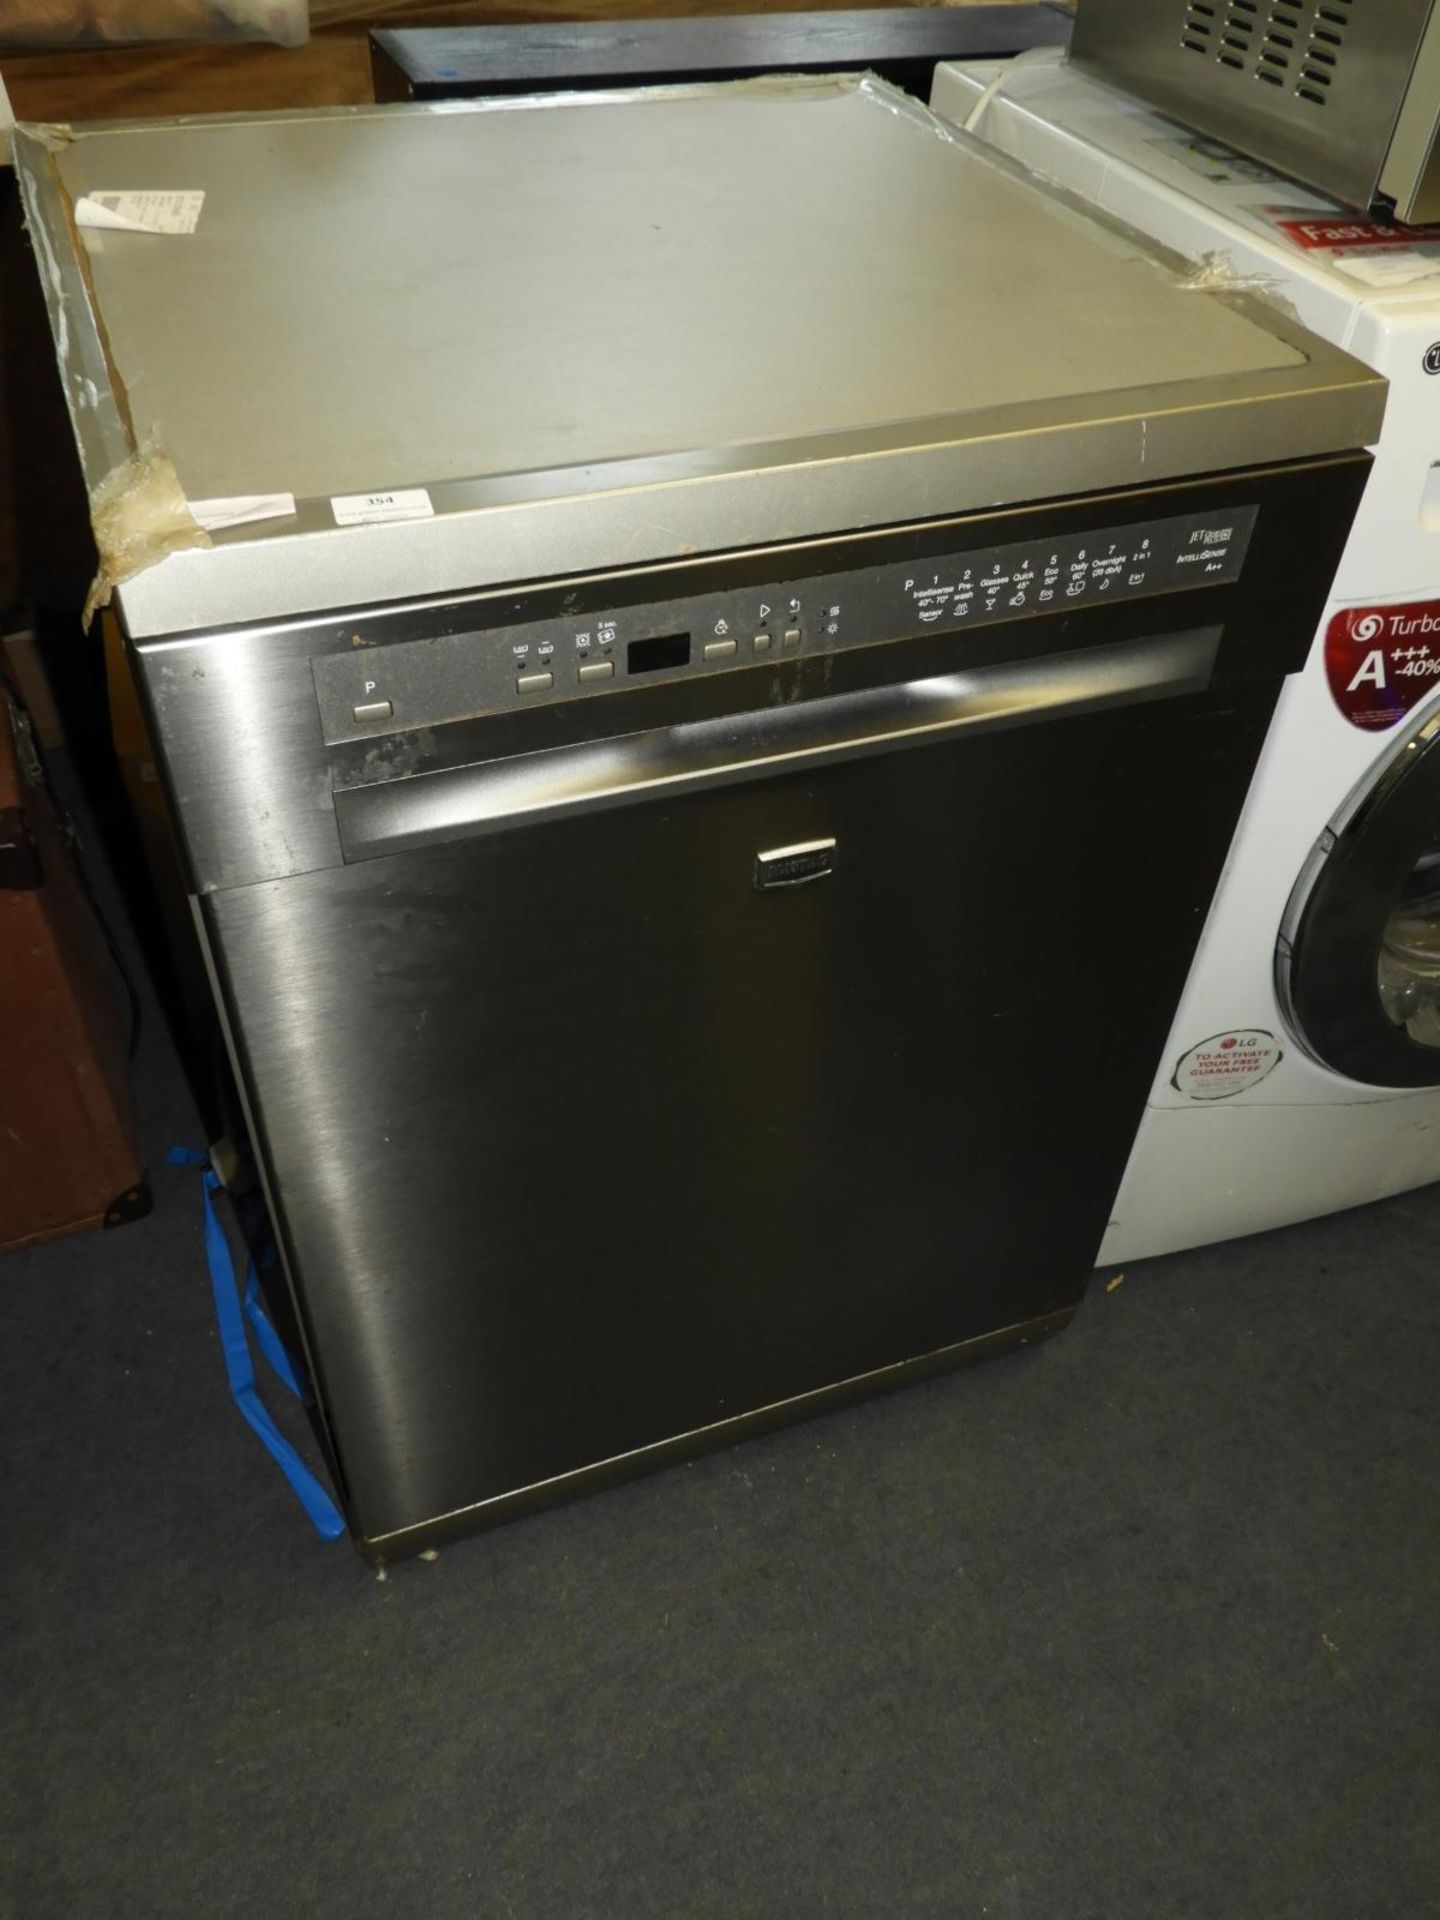 *Maytag Dishwasher in Stainless Steel Finish